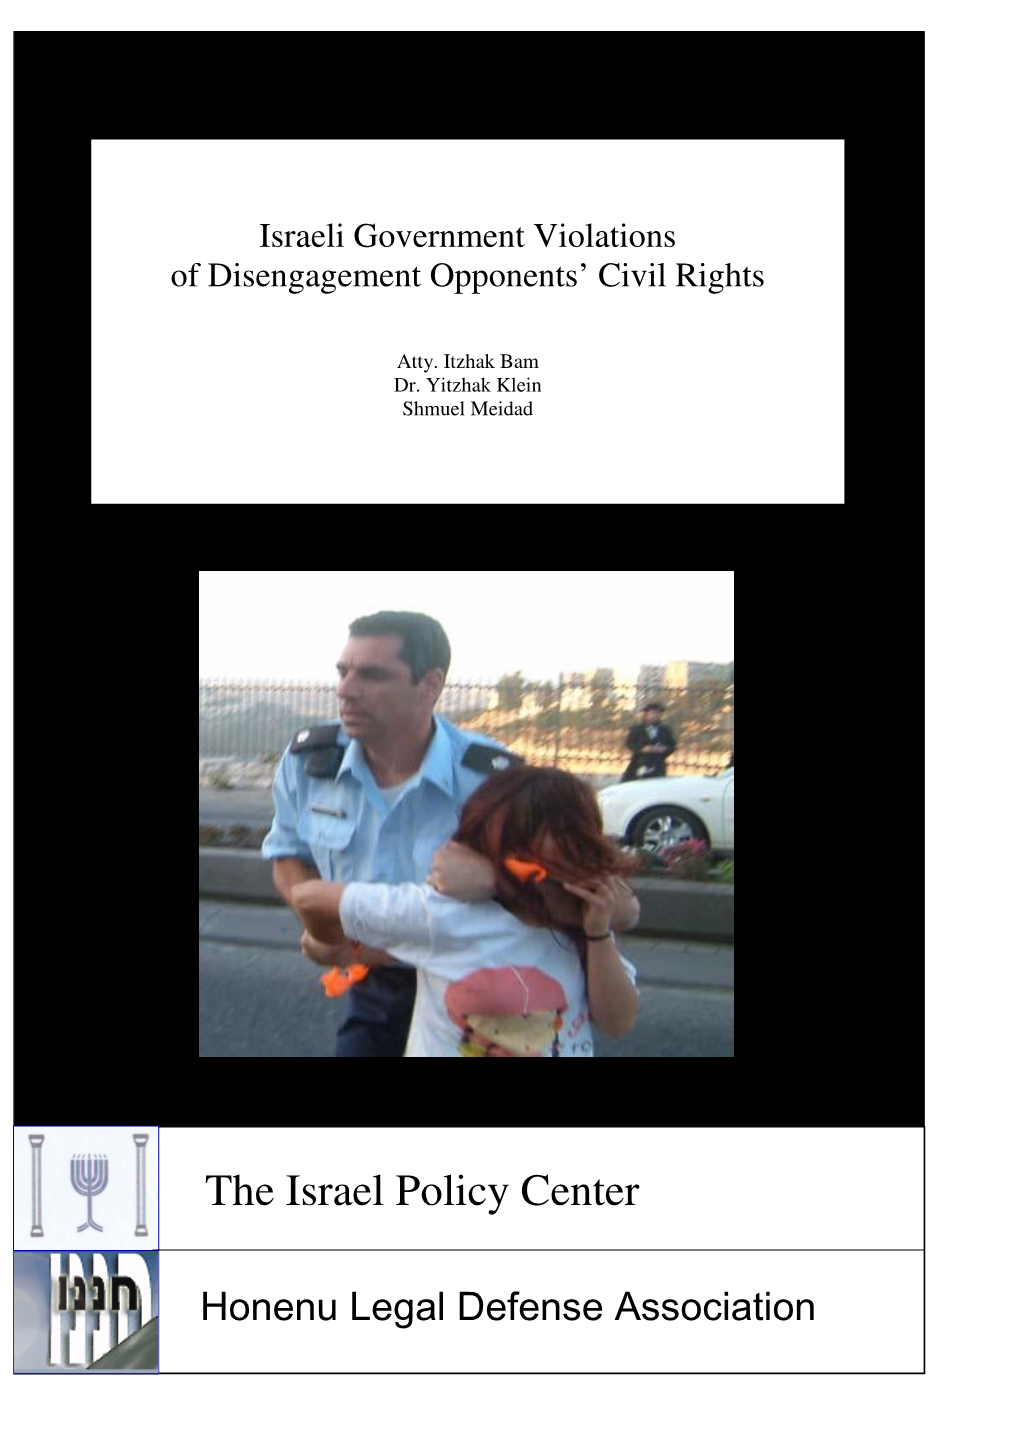 The Israel Policy Center